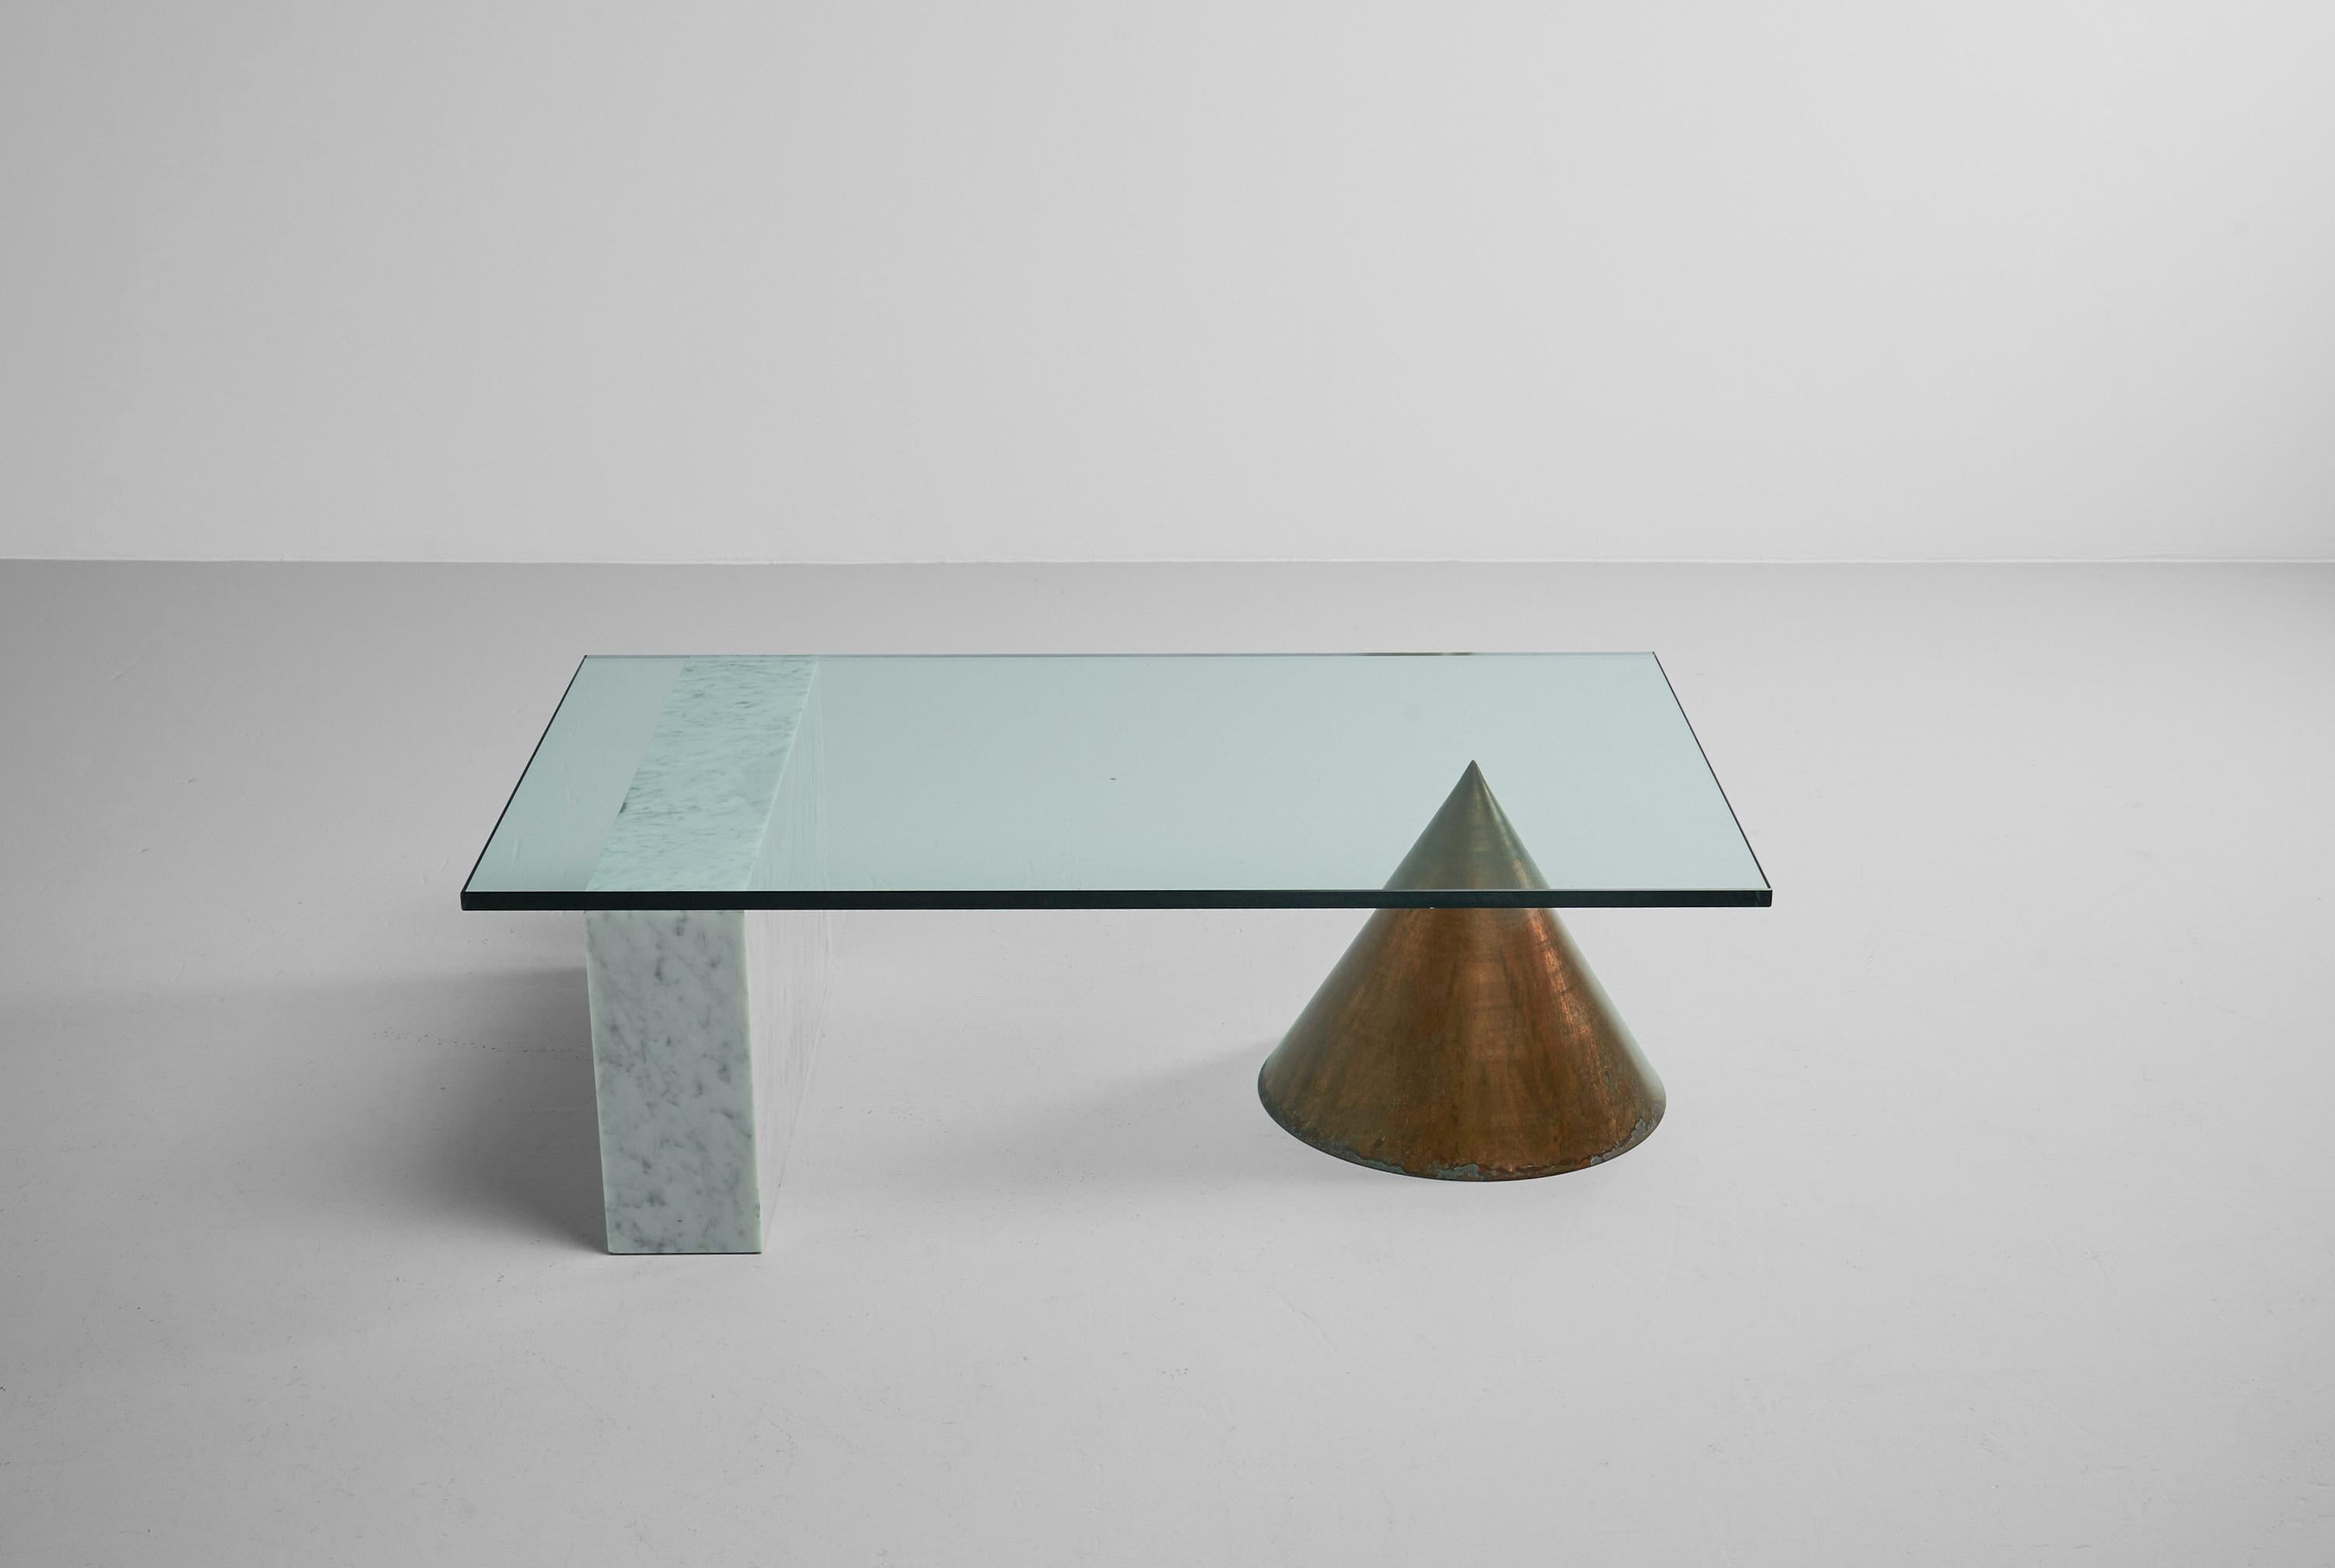 Playful so called 'Kono' coffee table designed by Lela and Massino Vignelli and manufactured by Casigliani, Italy 1979. The table was designed in July 1979 at a meeting between Massimo Vignelli and Casigliani in his New York City studio. It is said